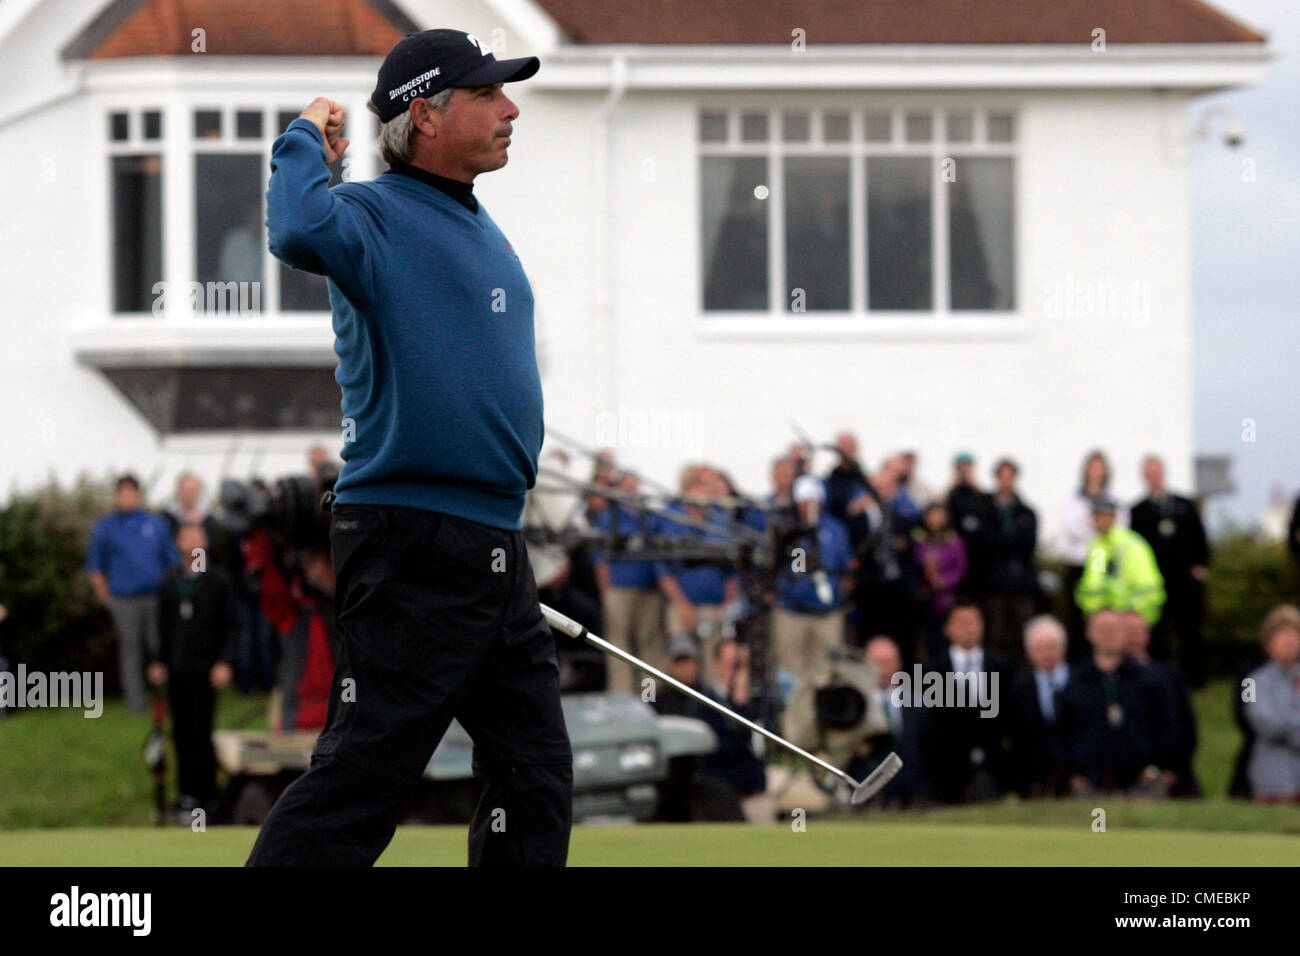 Ayrshire, UK. 29th July, 2012. Fred COUPLES putts to win the The Rolex Senior Open Championship from Turnberry. Stock Photo